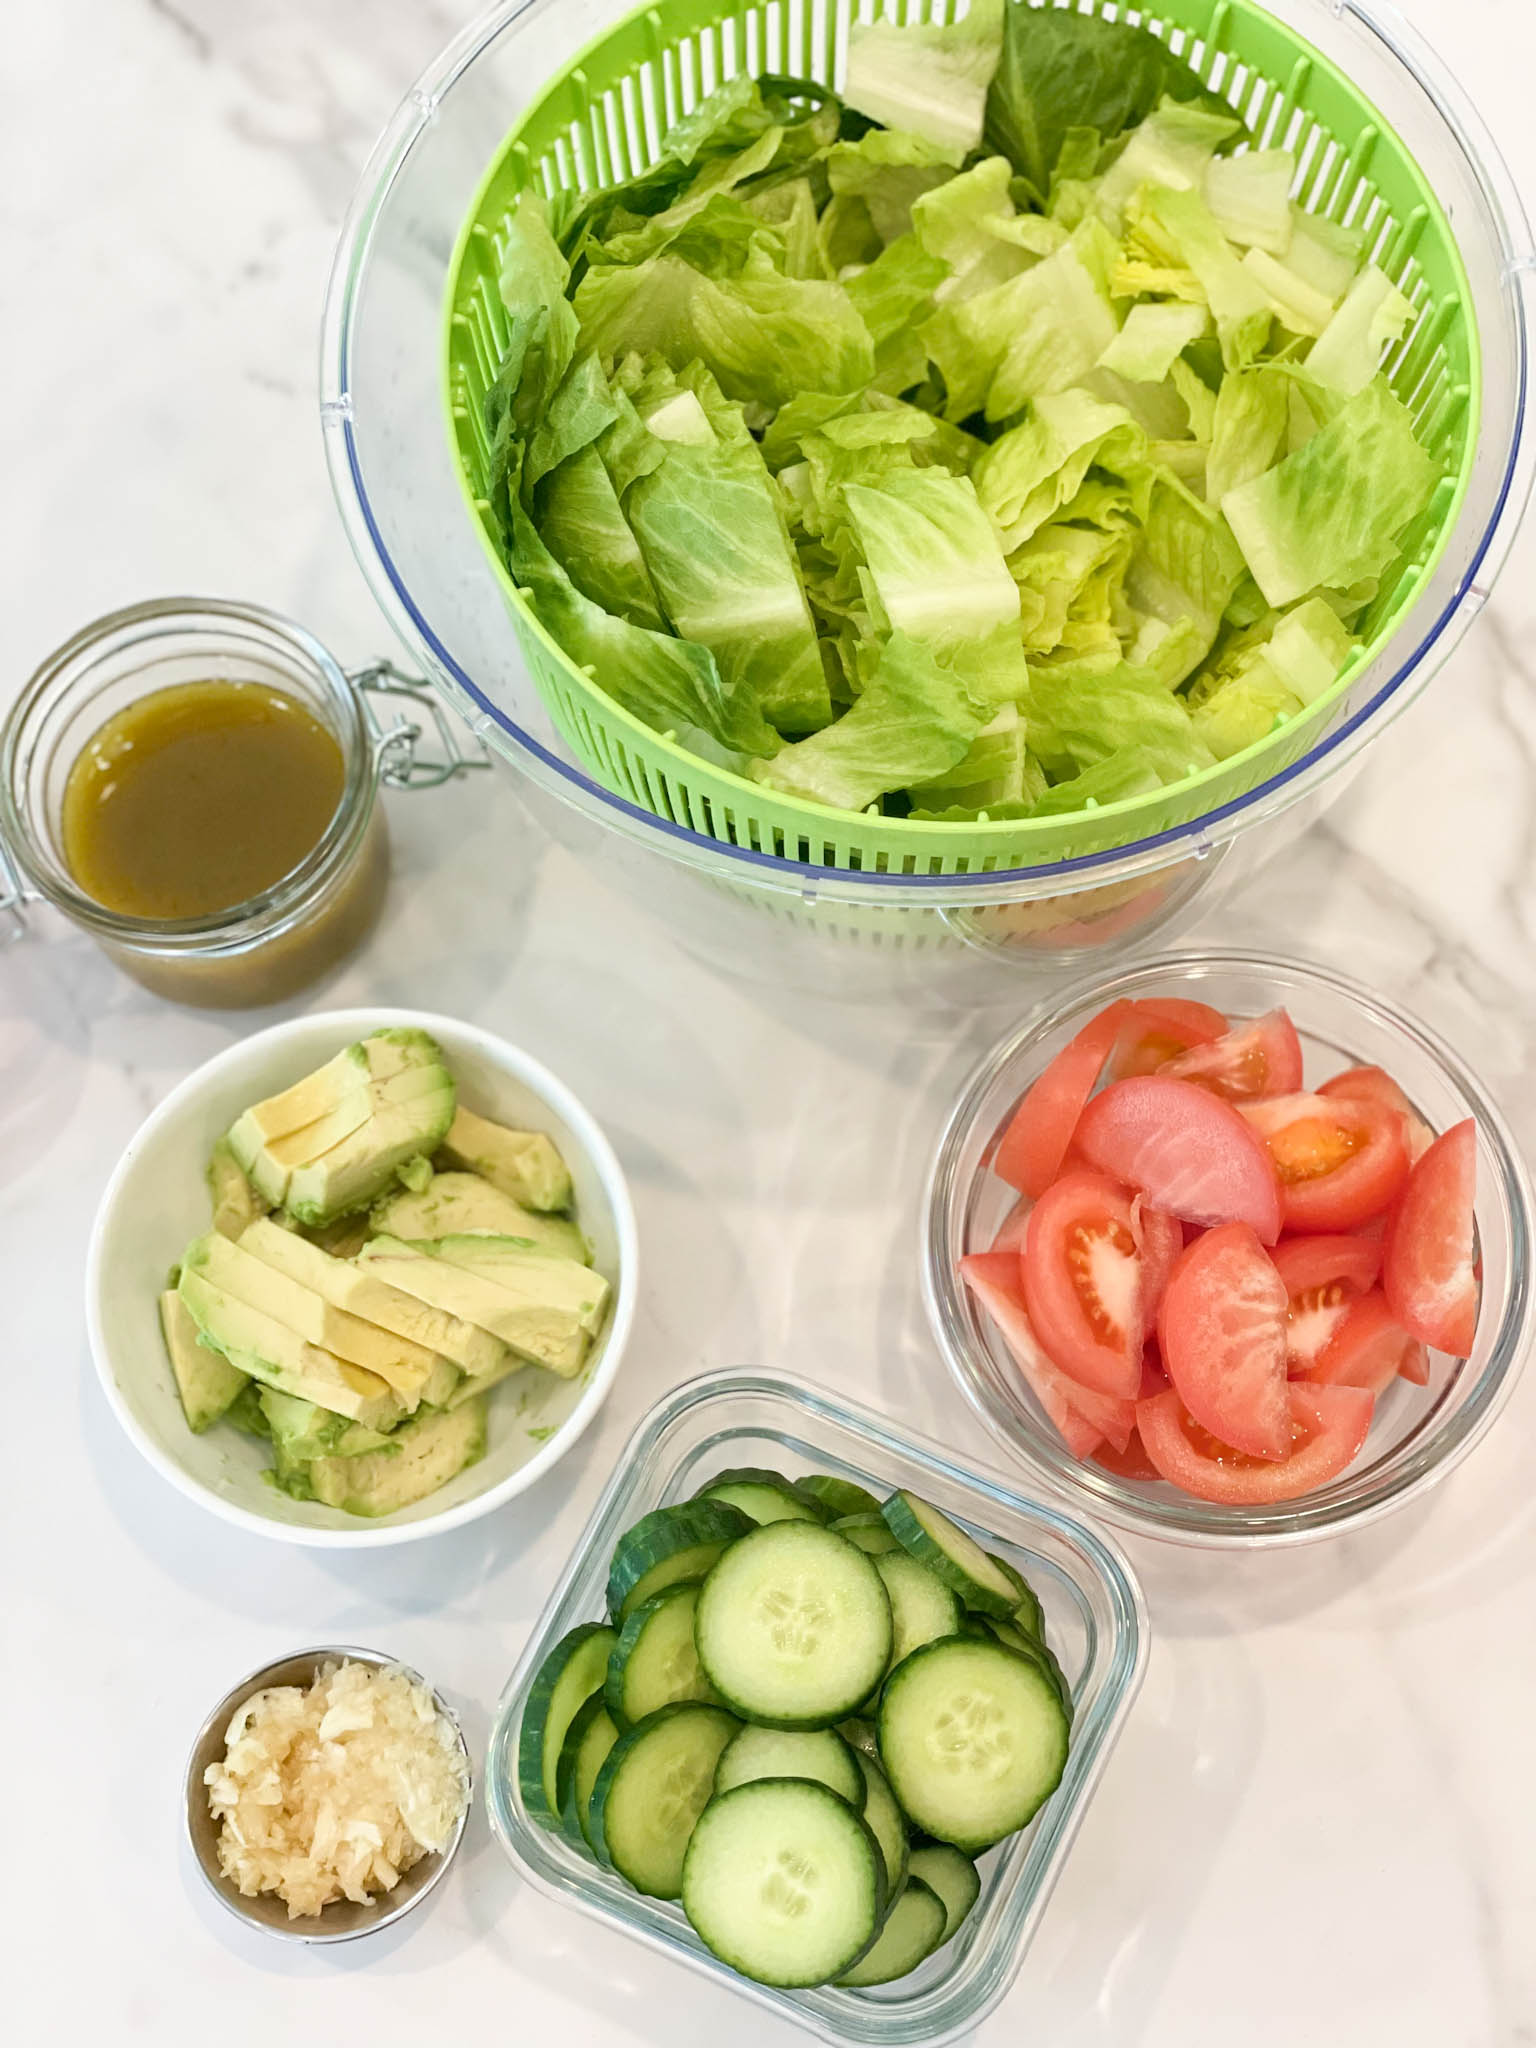 Ingredients for a salad. Cucumbers, tomatoes, fresh garlic, avocados, vinaigrette and romaine lettuce in separate bowls.